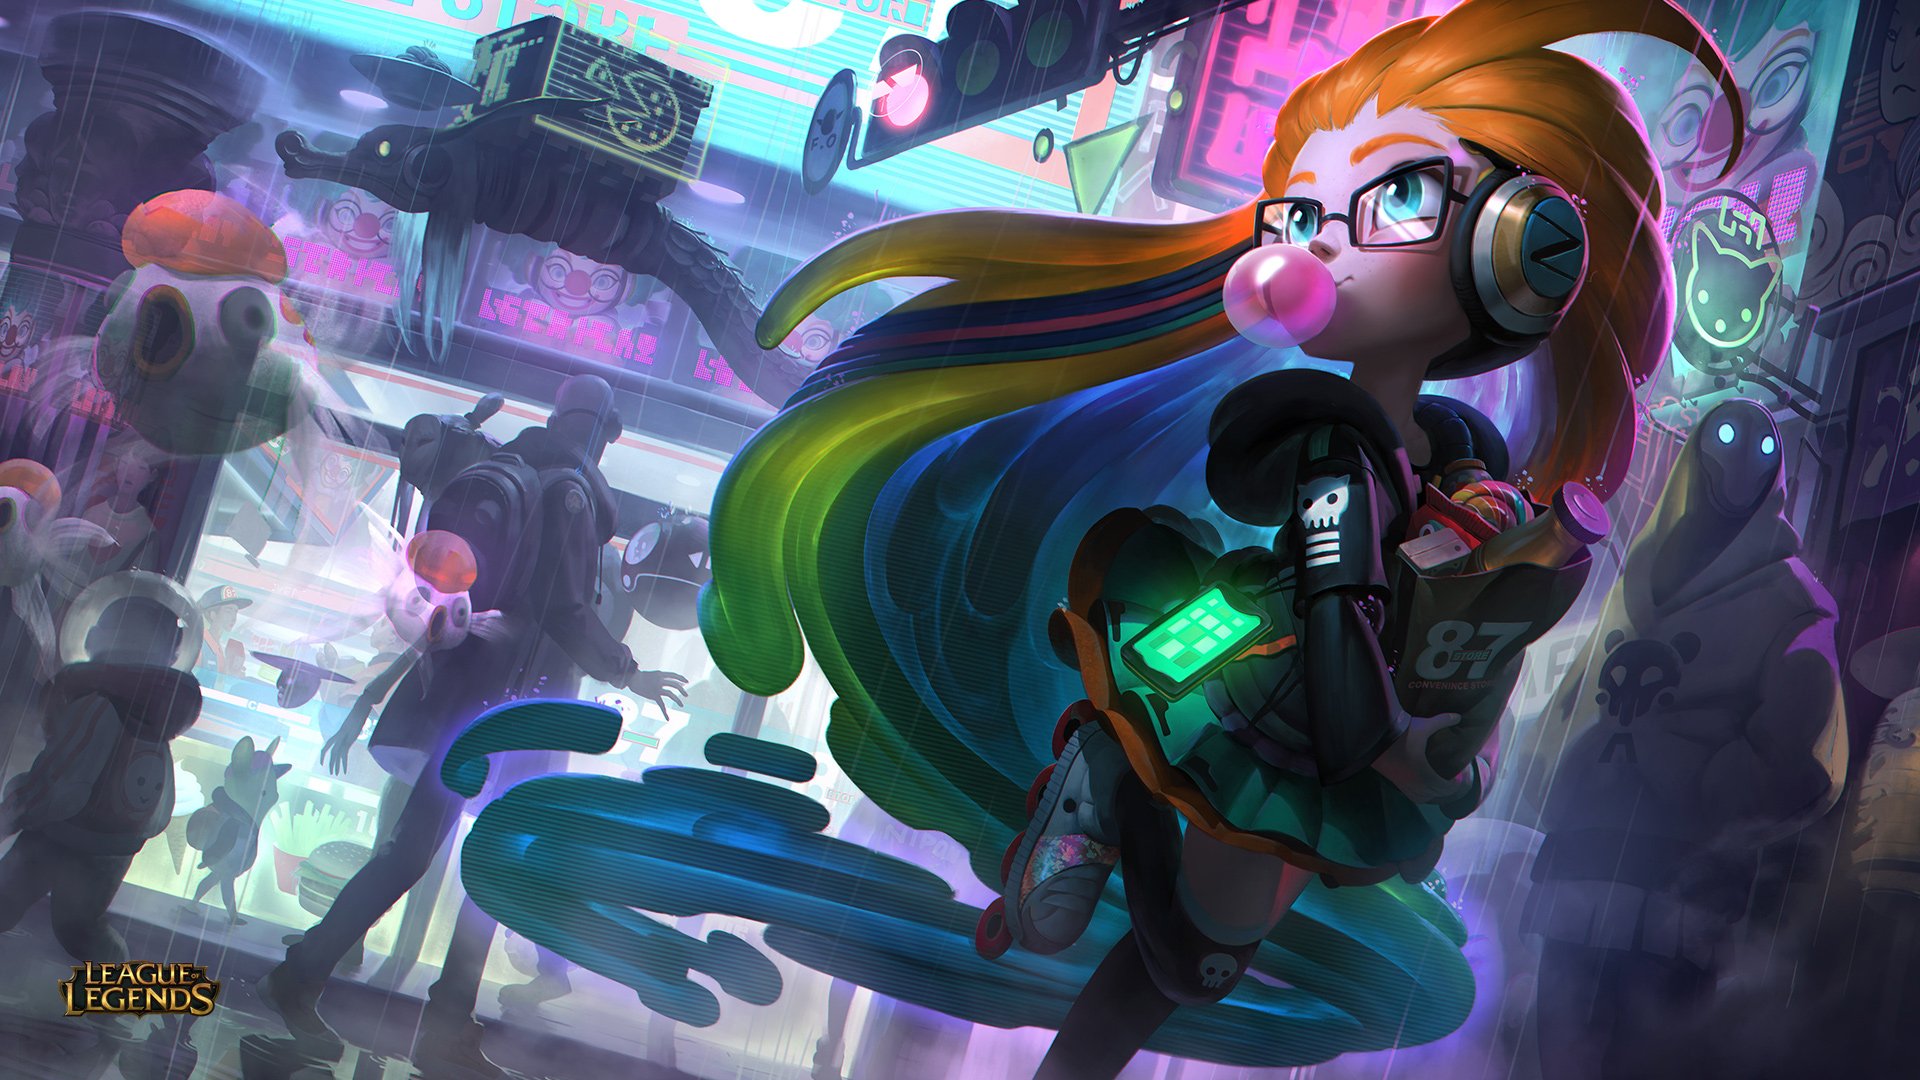 13 Zoe League Of Legends Hd Wallpapers Background Images Images, Photos, Reviews